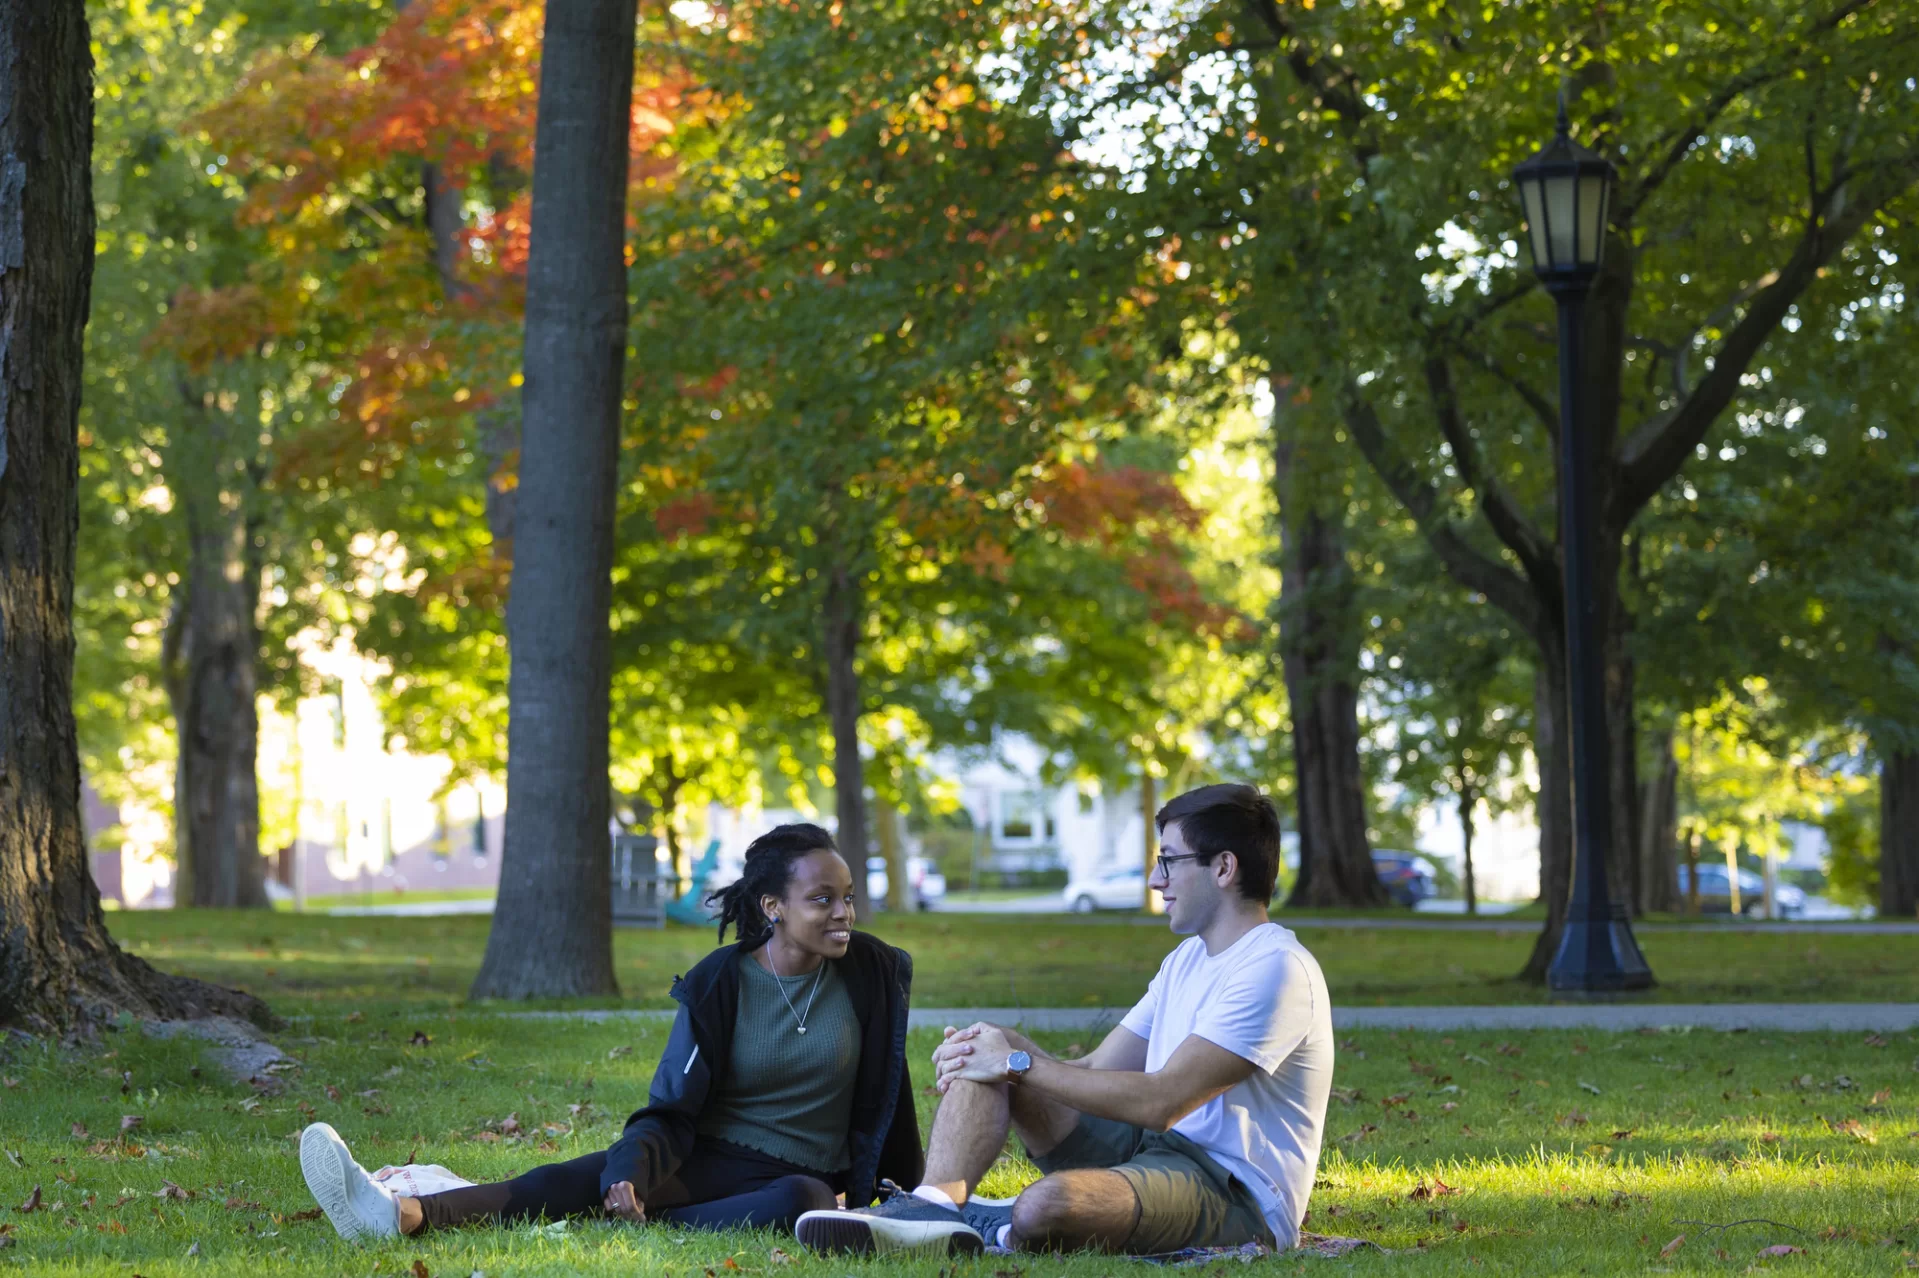 “It’s mindfulness for college.”

—Fiki Hunt ’24 of New York City, a double major in psychology and film, joins neuroscience major Luke Janak ’24 of Blauvelt, N.Y., for golden hour on the Historic Quad. After tossing a frisbee, they sat down to take some time “to decompress from classes,” Hunt said.